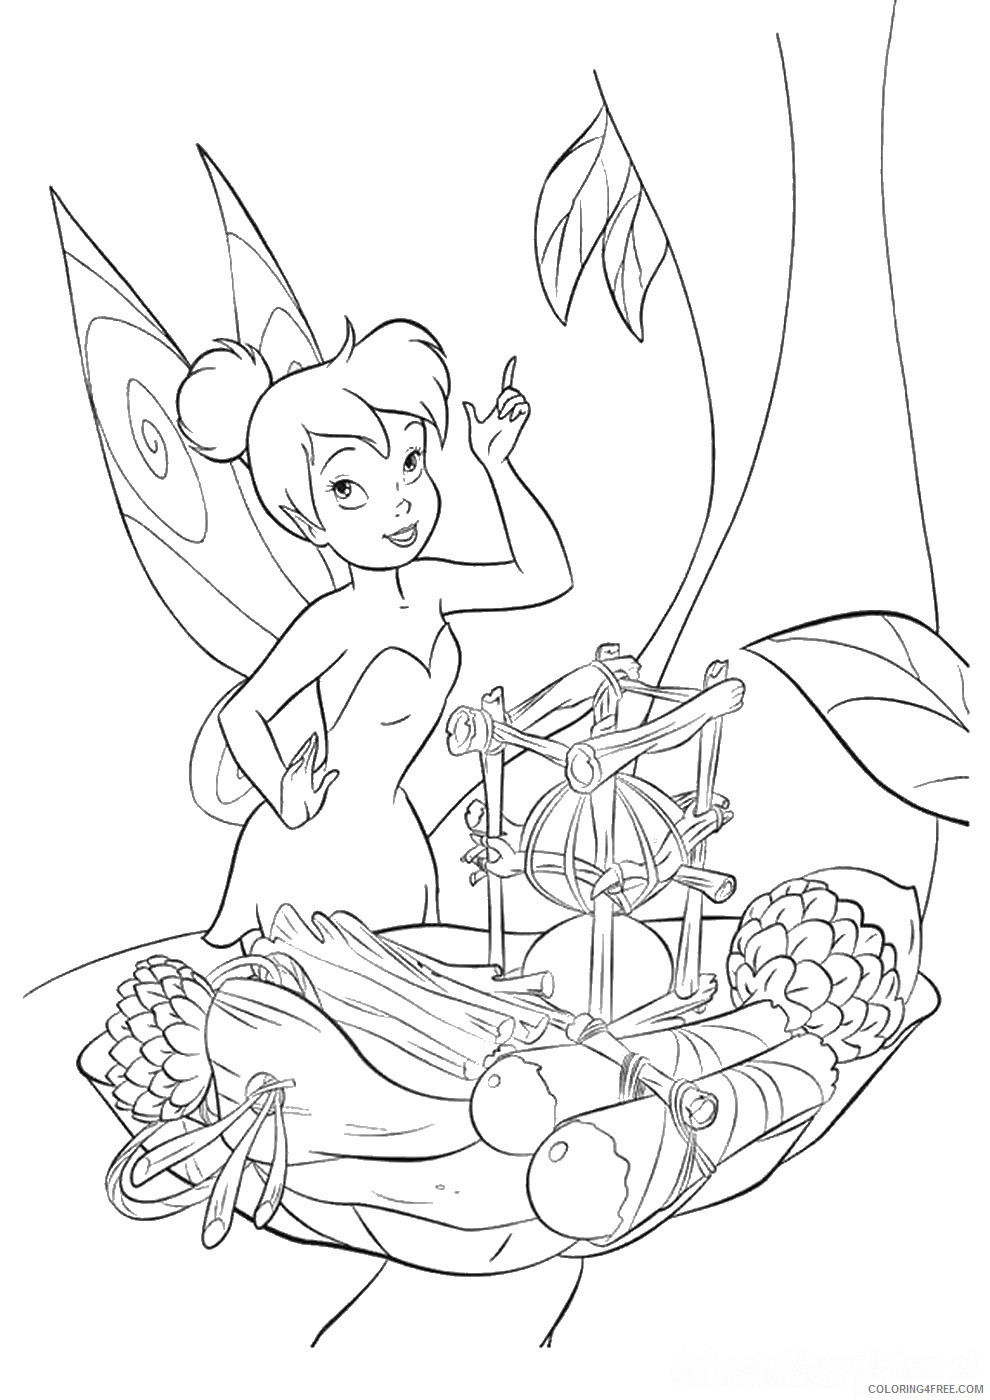 Tinker Bell Coloring Pages Cartoons tinkerbell_cl_36 Printable 2020 6643 Coloring4free